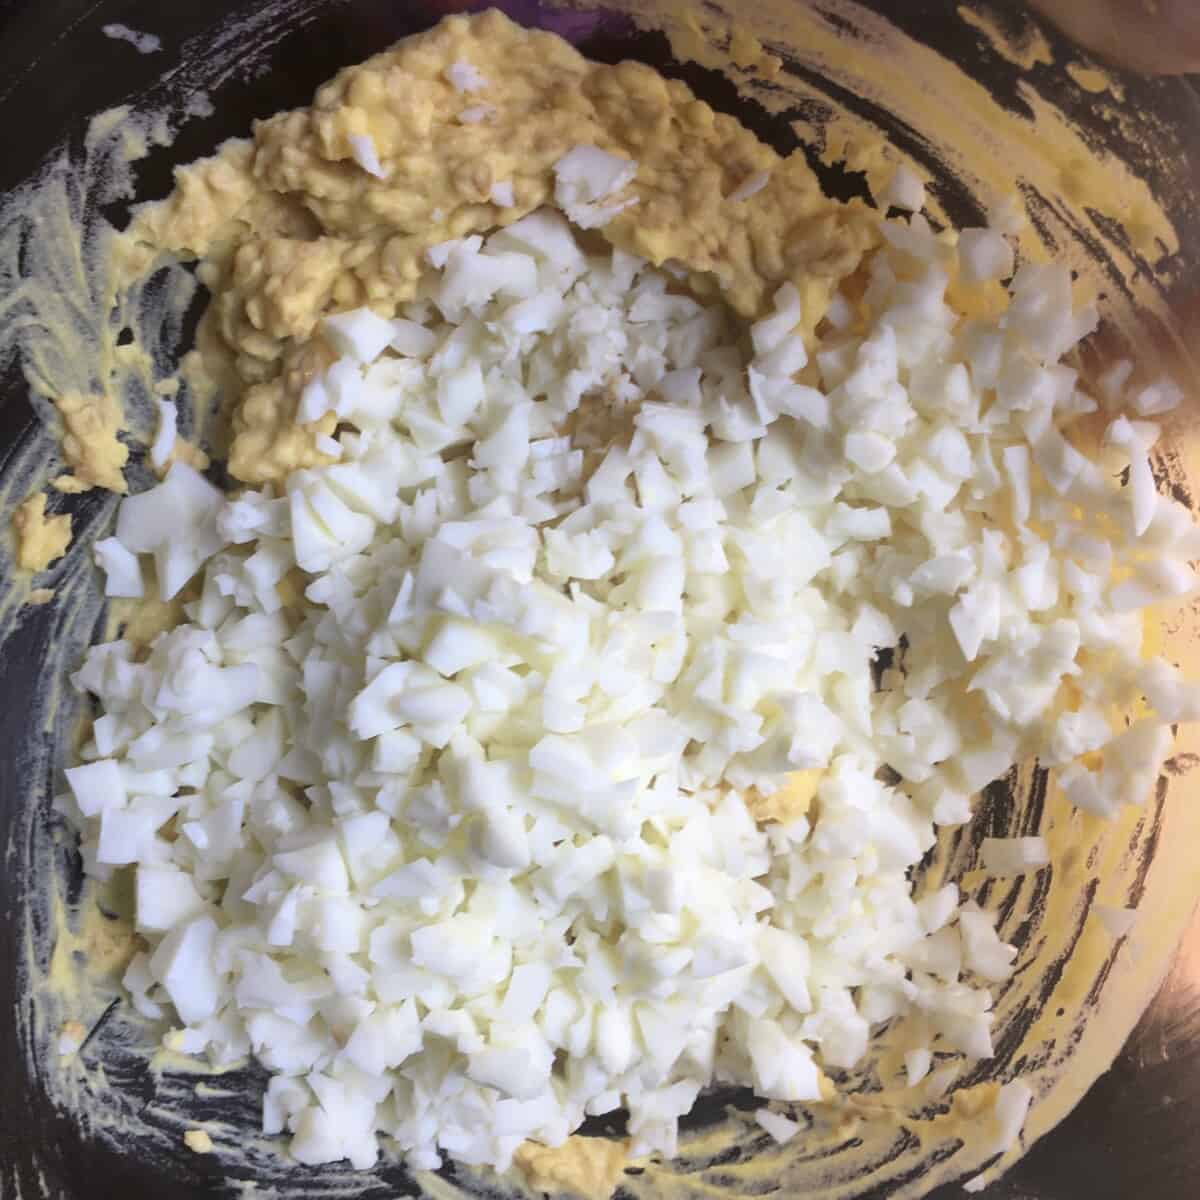 finely diced egg whites added to the yolk mixture but not yet stirred in